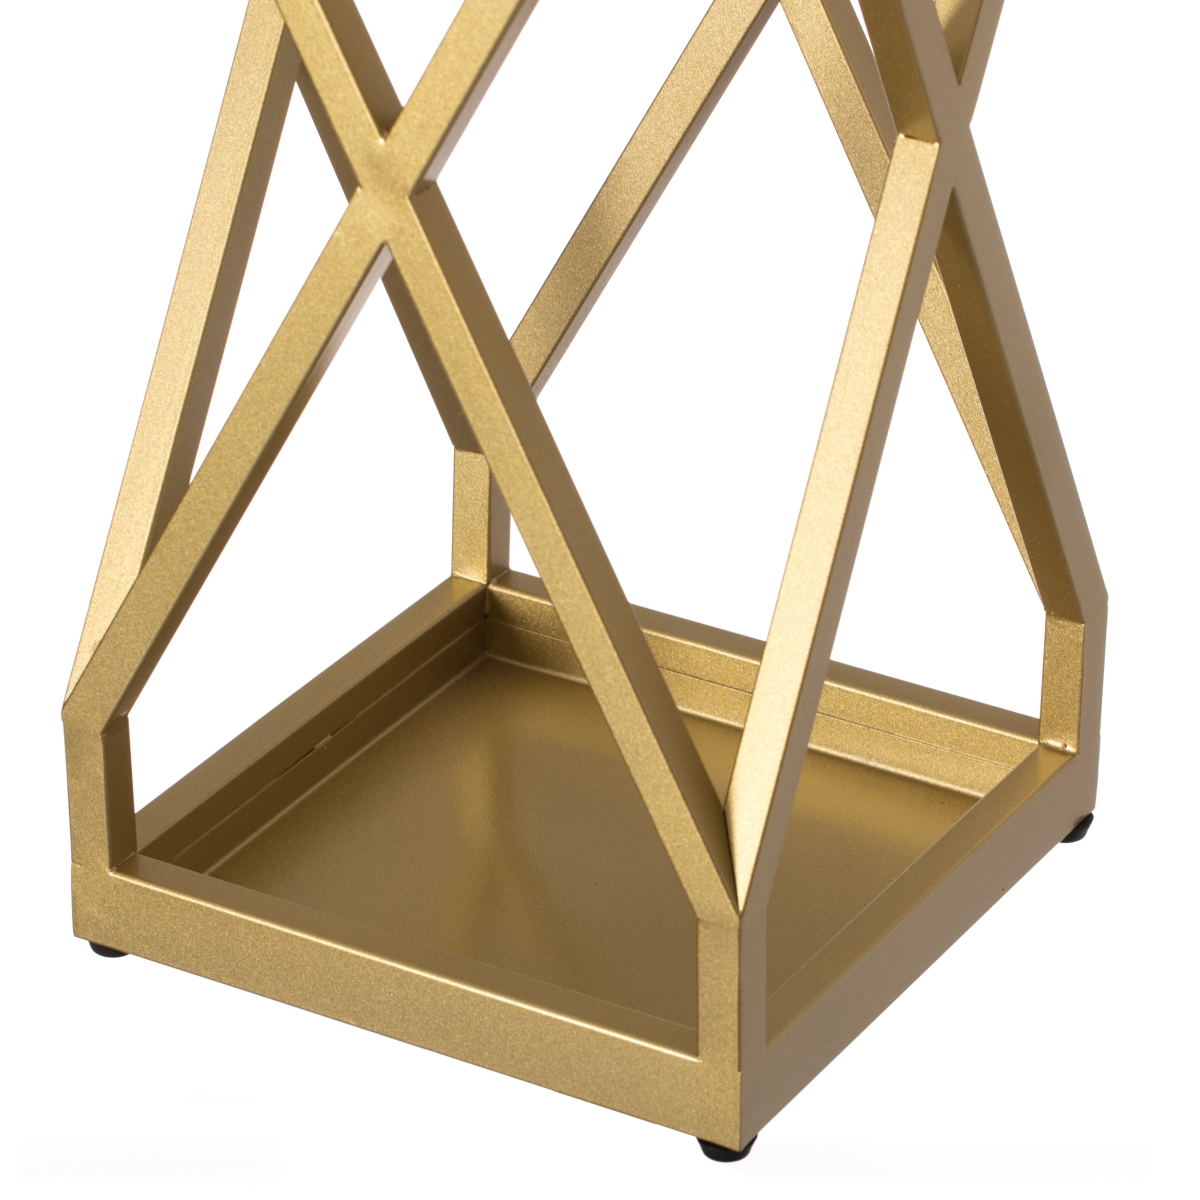 Picture of Vintiquewise QI004471 Decorative Gold Square X Design Umbrella Holder Stand for Indoor and Outdoor